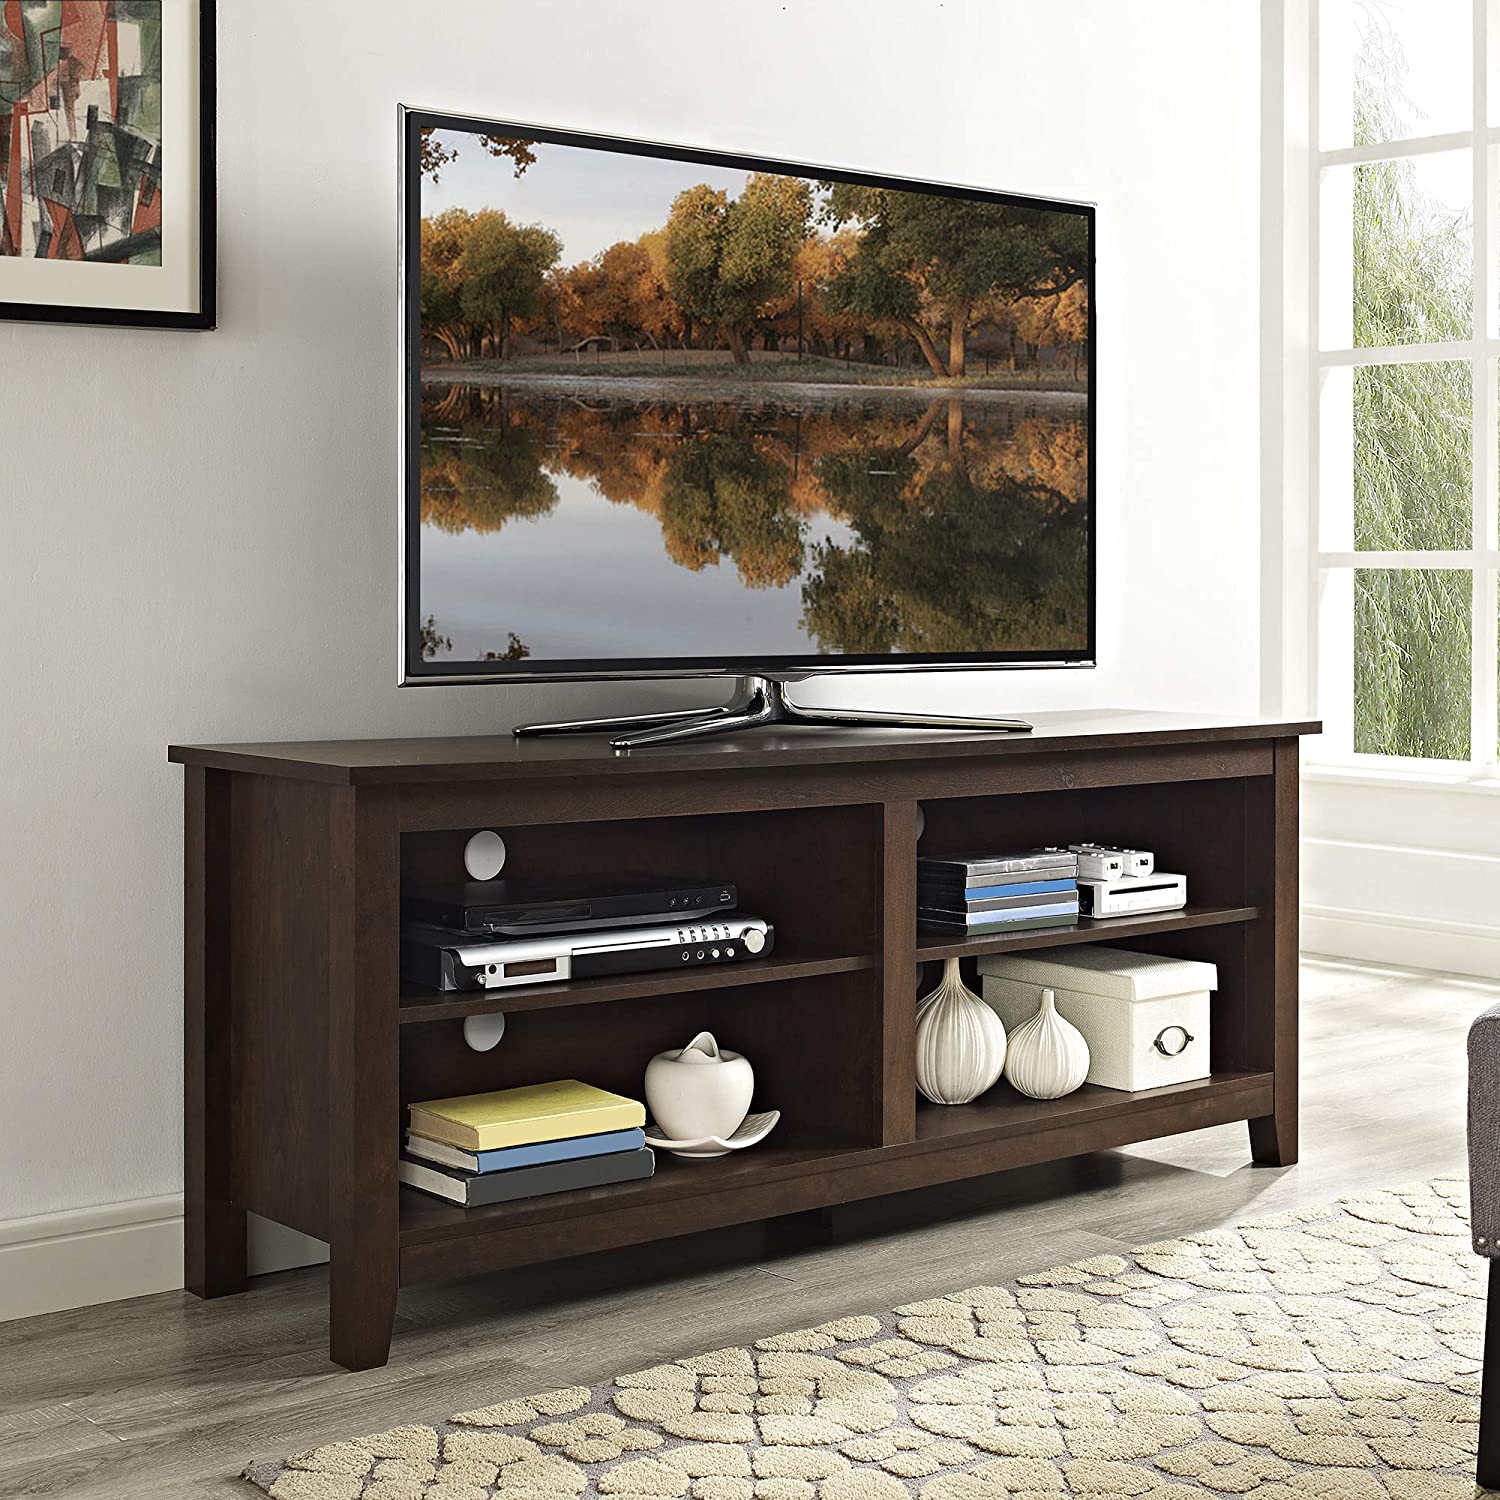 Walker Edison Wren Classic 4 Cubby TV Stand for TVs up to 65 Inches, 58 Inch, Brown - image 1 of 5